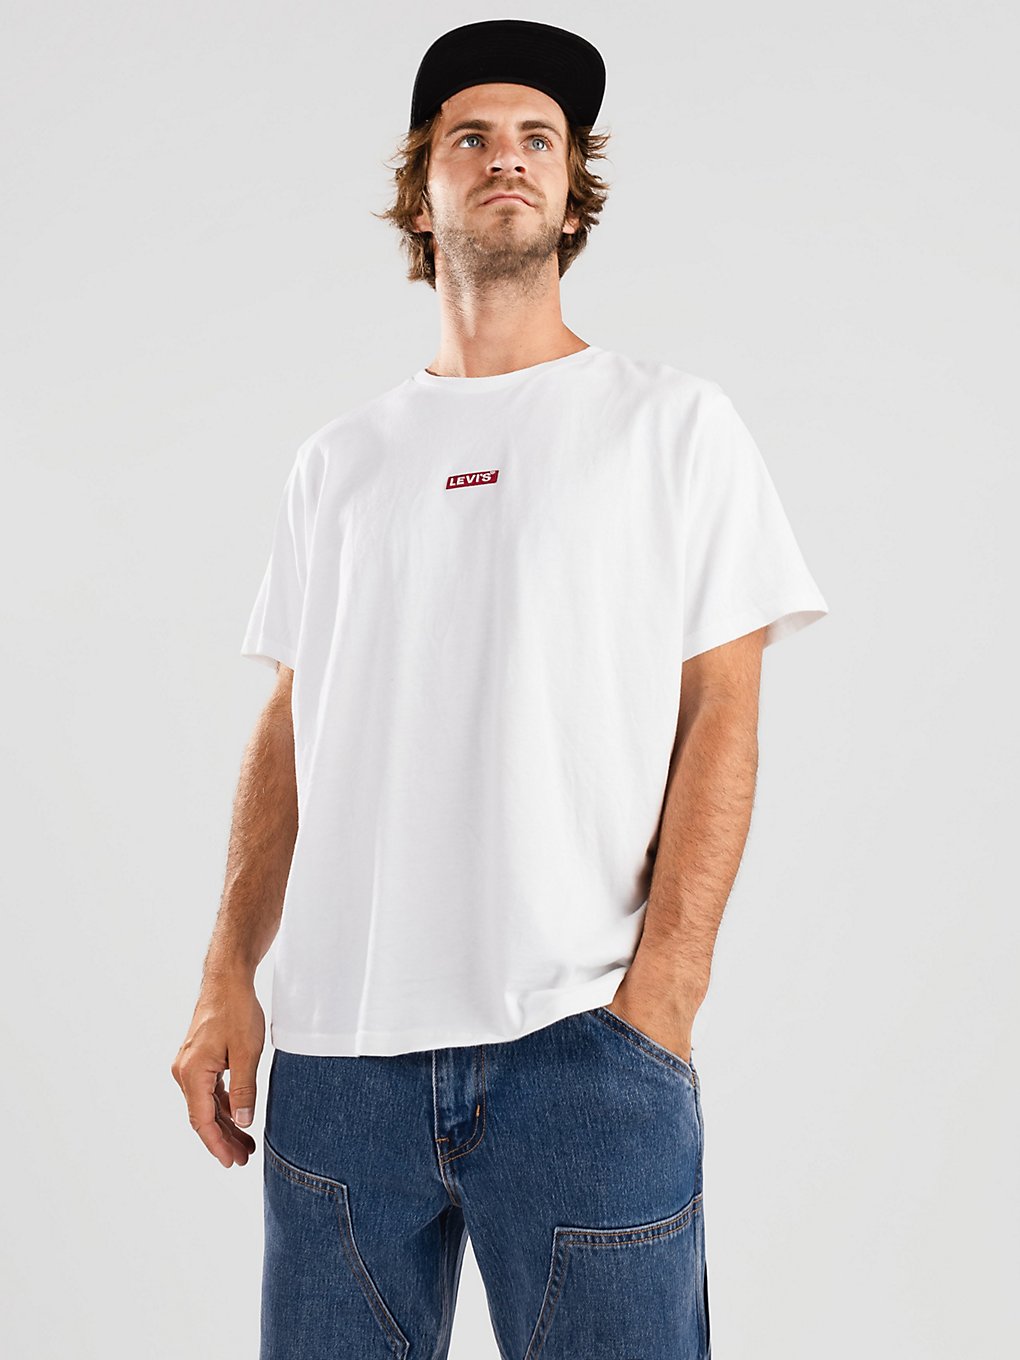 Levi's Relaxed Baby Tab T-Shirt bright white kaufen